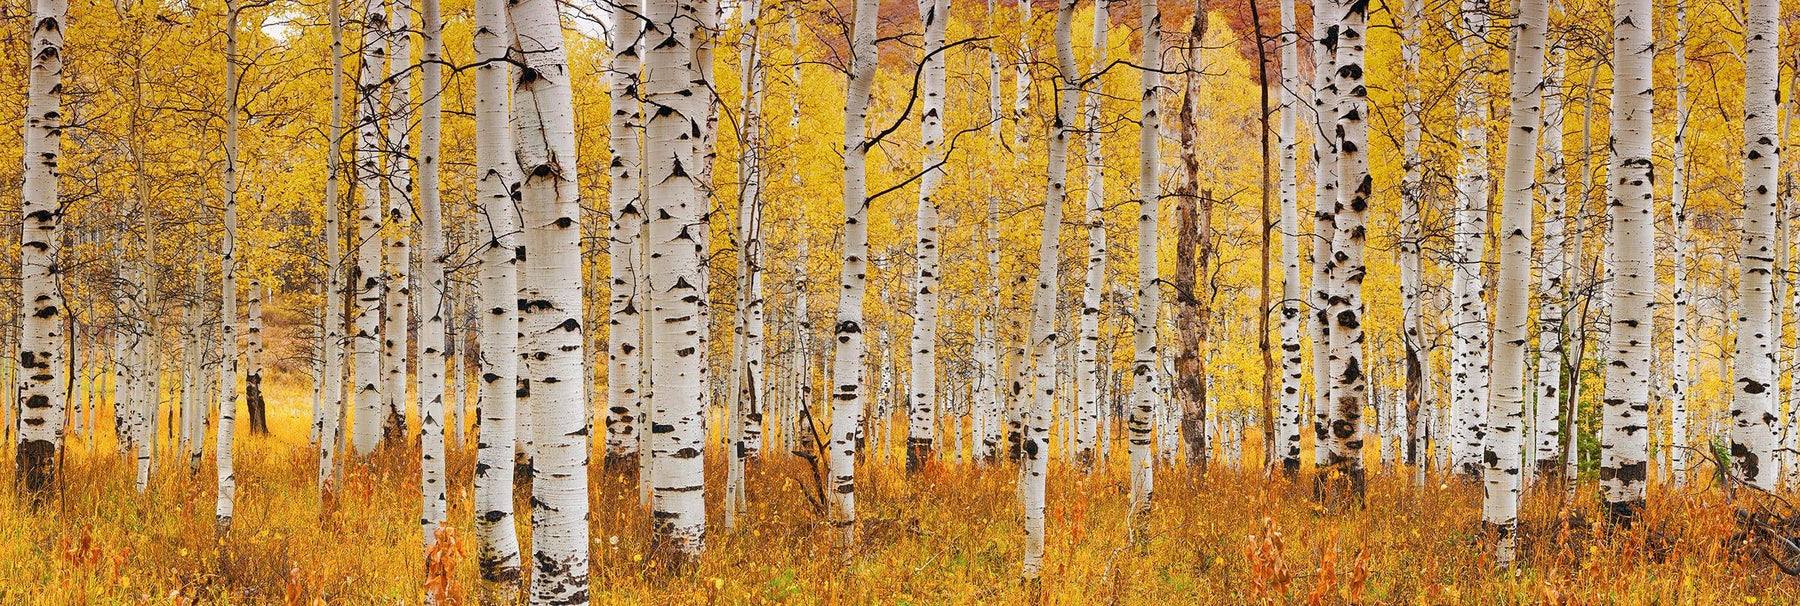 Forest of white aspen trees covered with yellow leaves in Deer Valley Utah